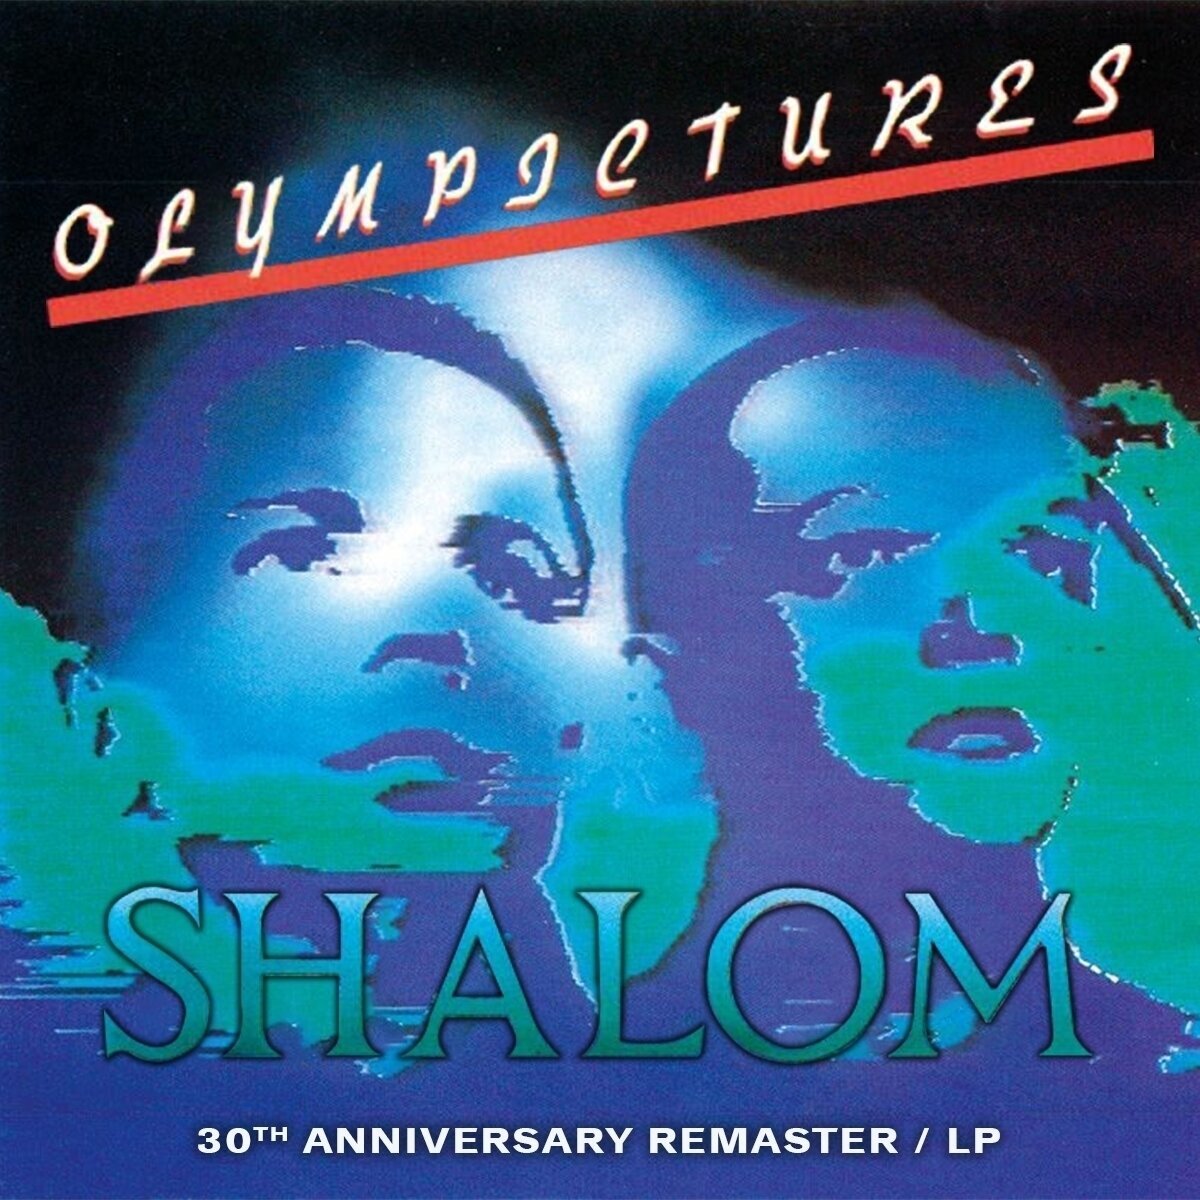 Musik-CD Shalom - Olympictures (30th Anniversary) (Remastered) (CD)